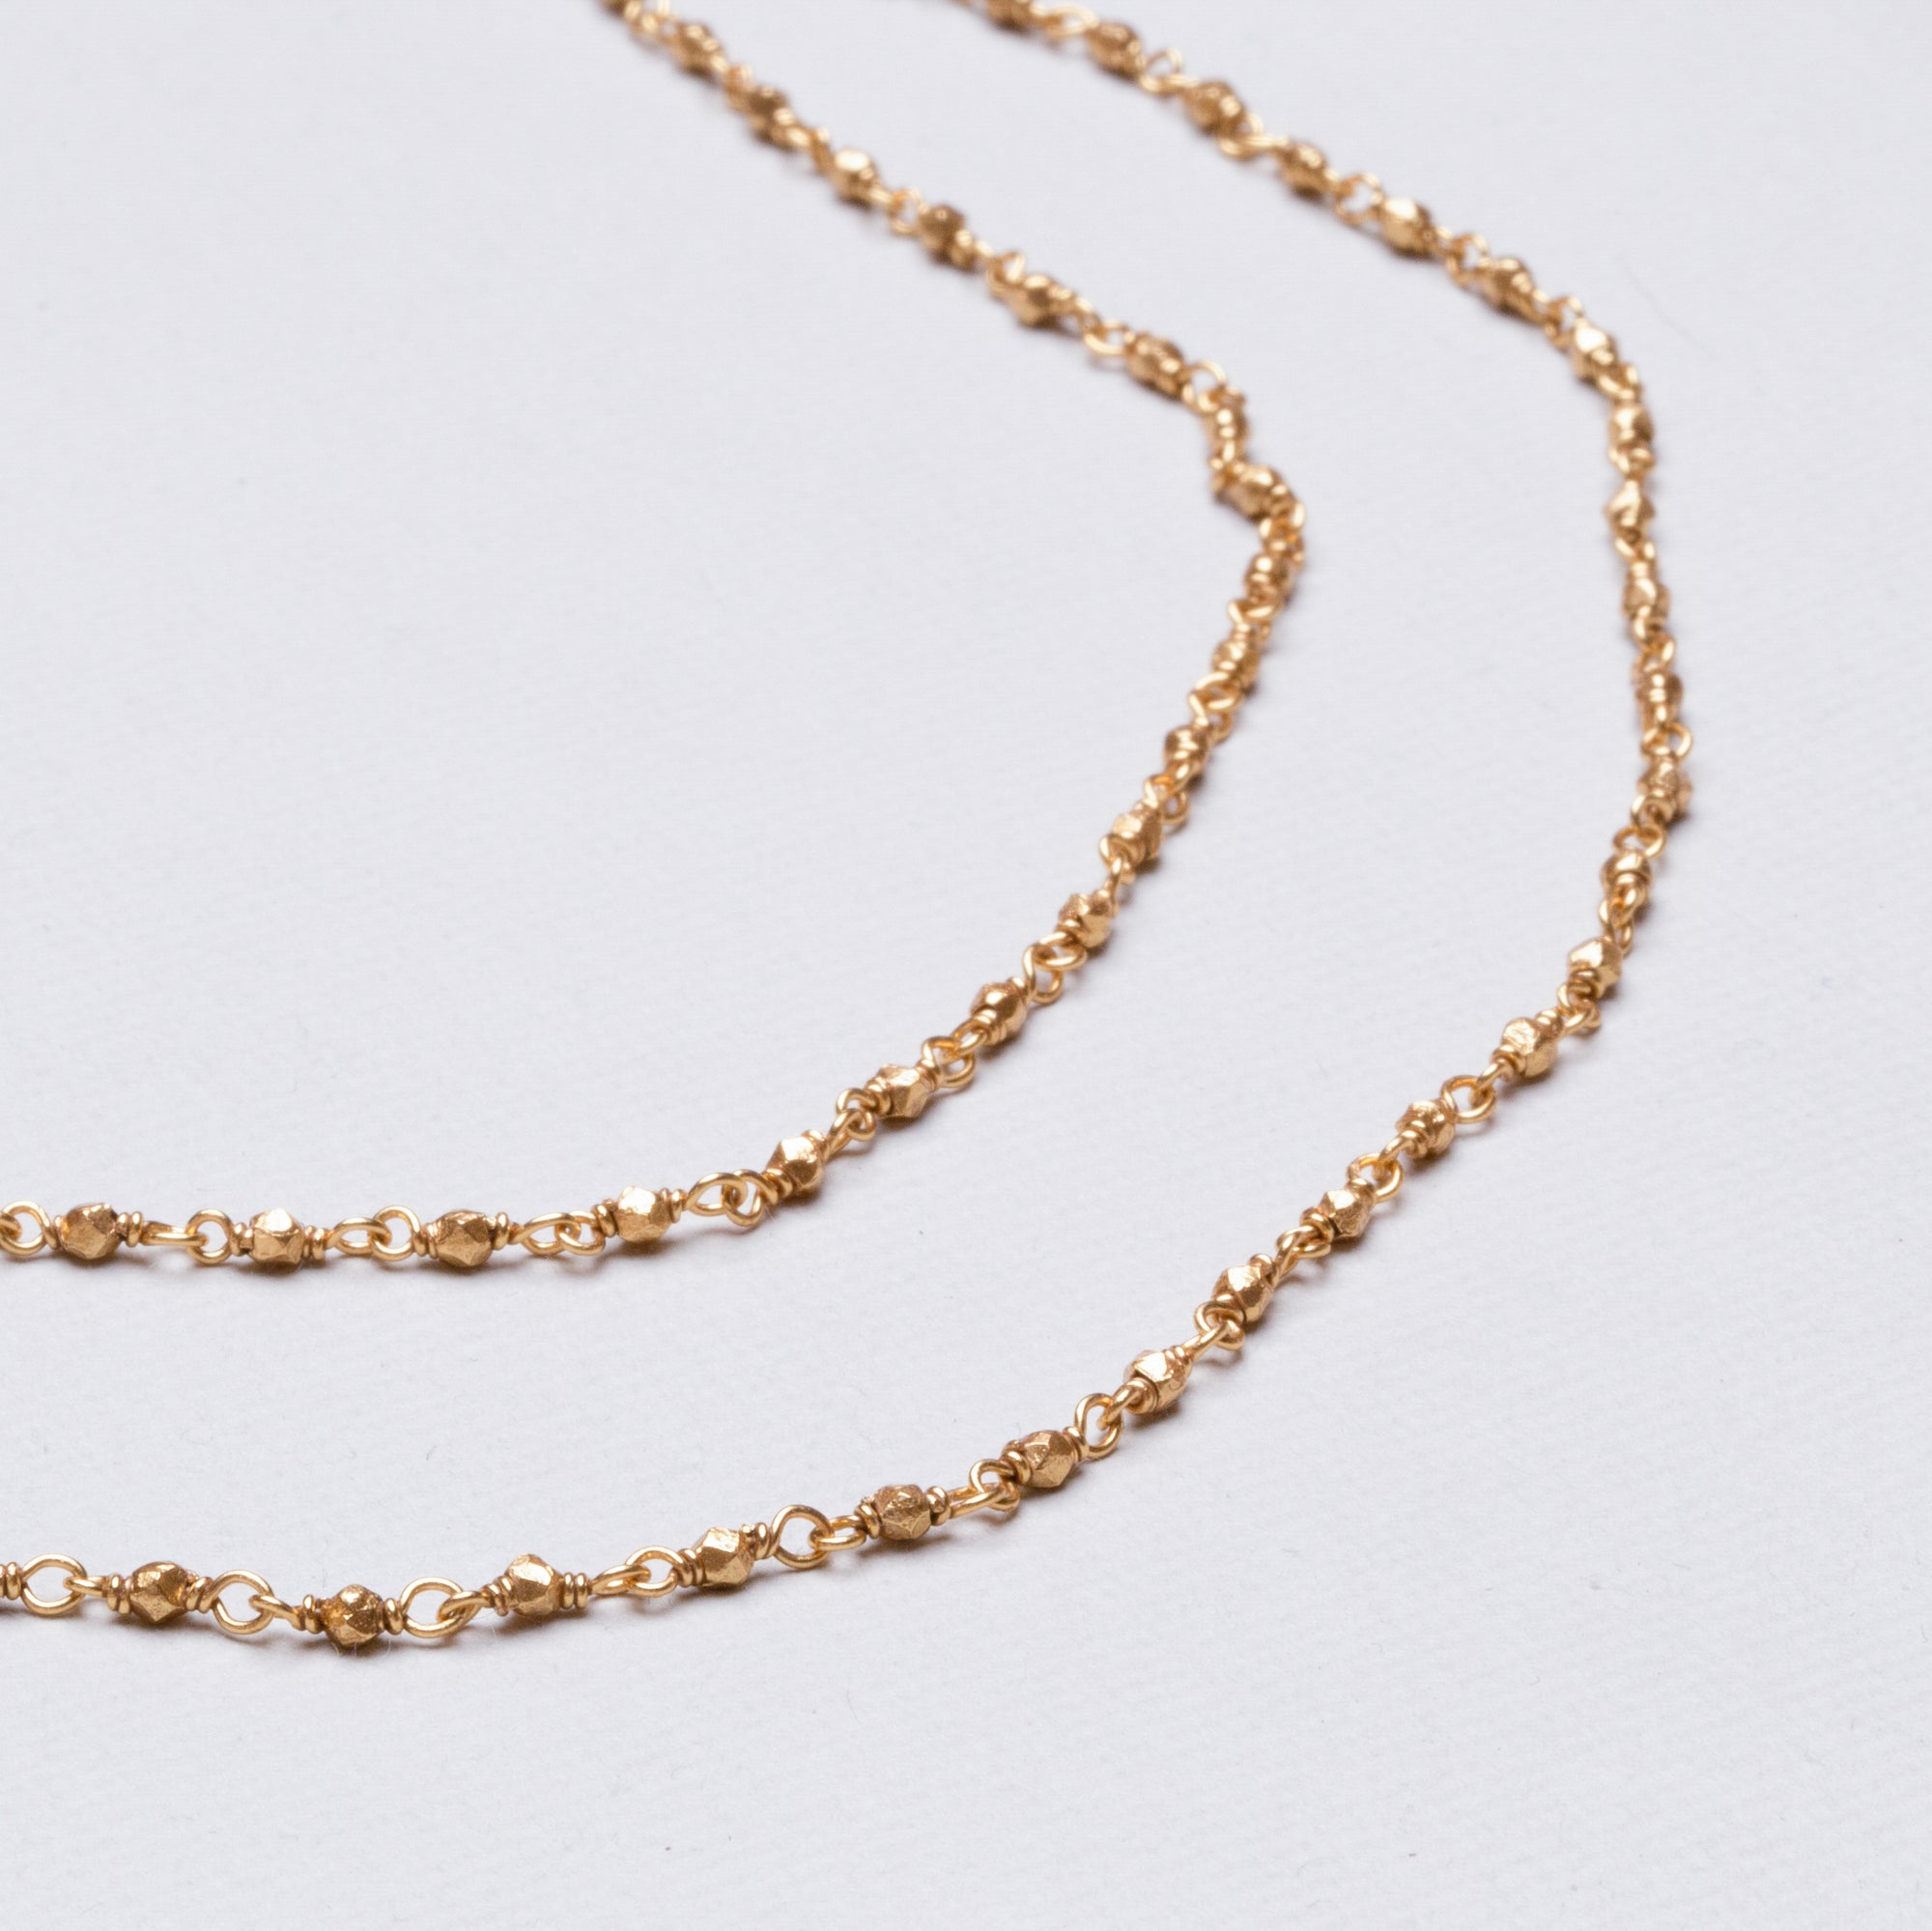 Long Gold-plated Silver Beads Chain Necklace